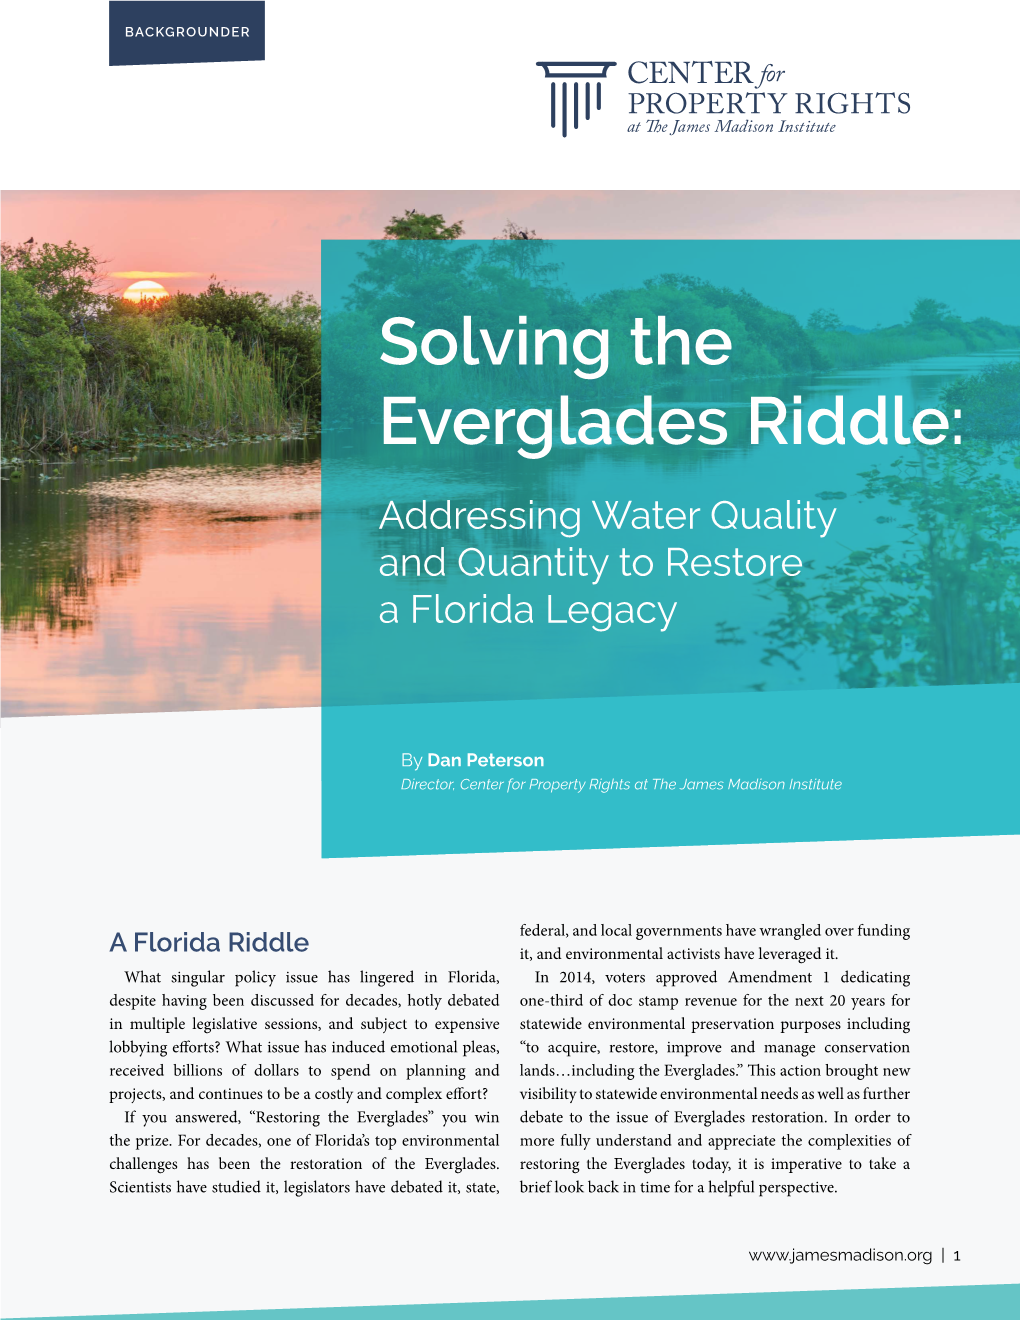 Solving the Everglades Riddle: Addressing Water Quality and Quantity to Restore a Florida Legacy